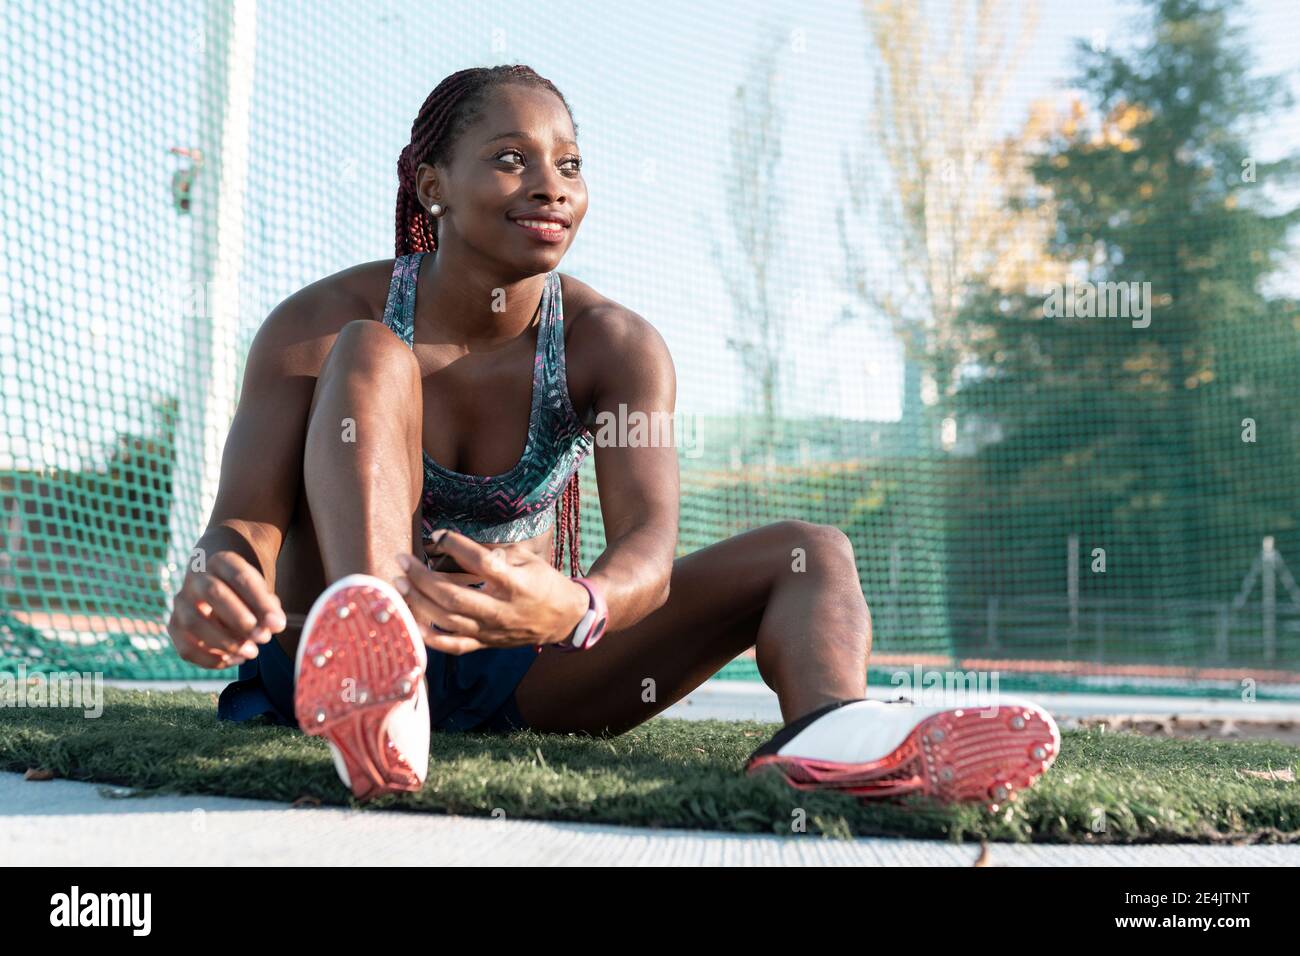 Smiling young sportswoman looking away while tying shoelace against net Stock Photo